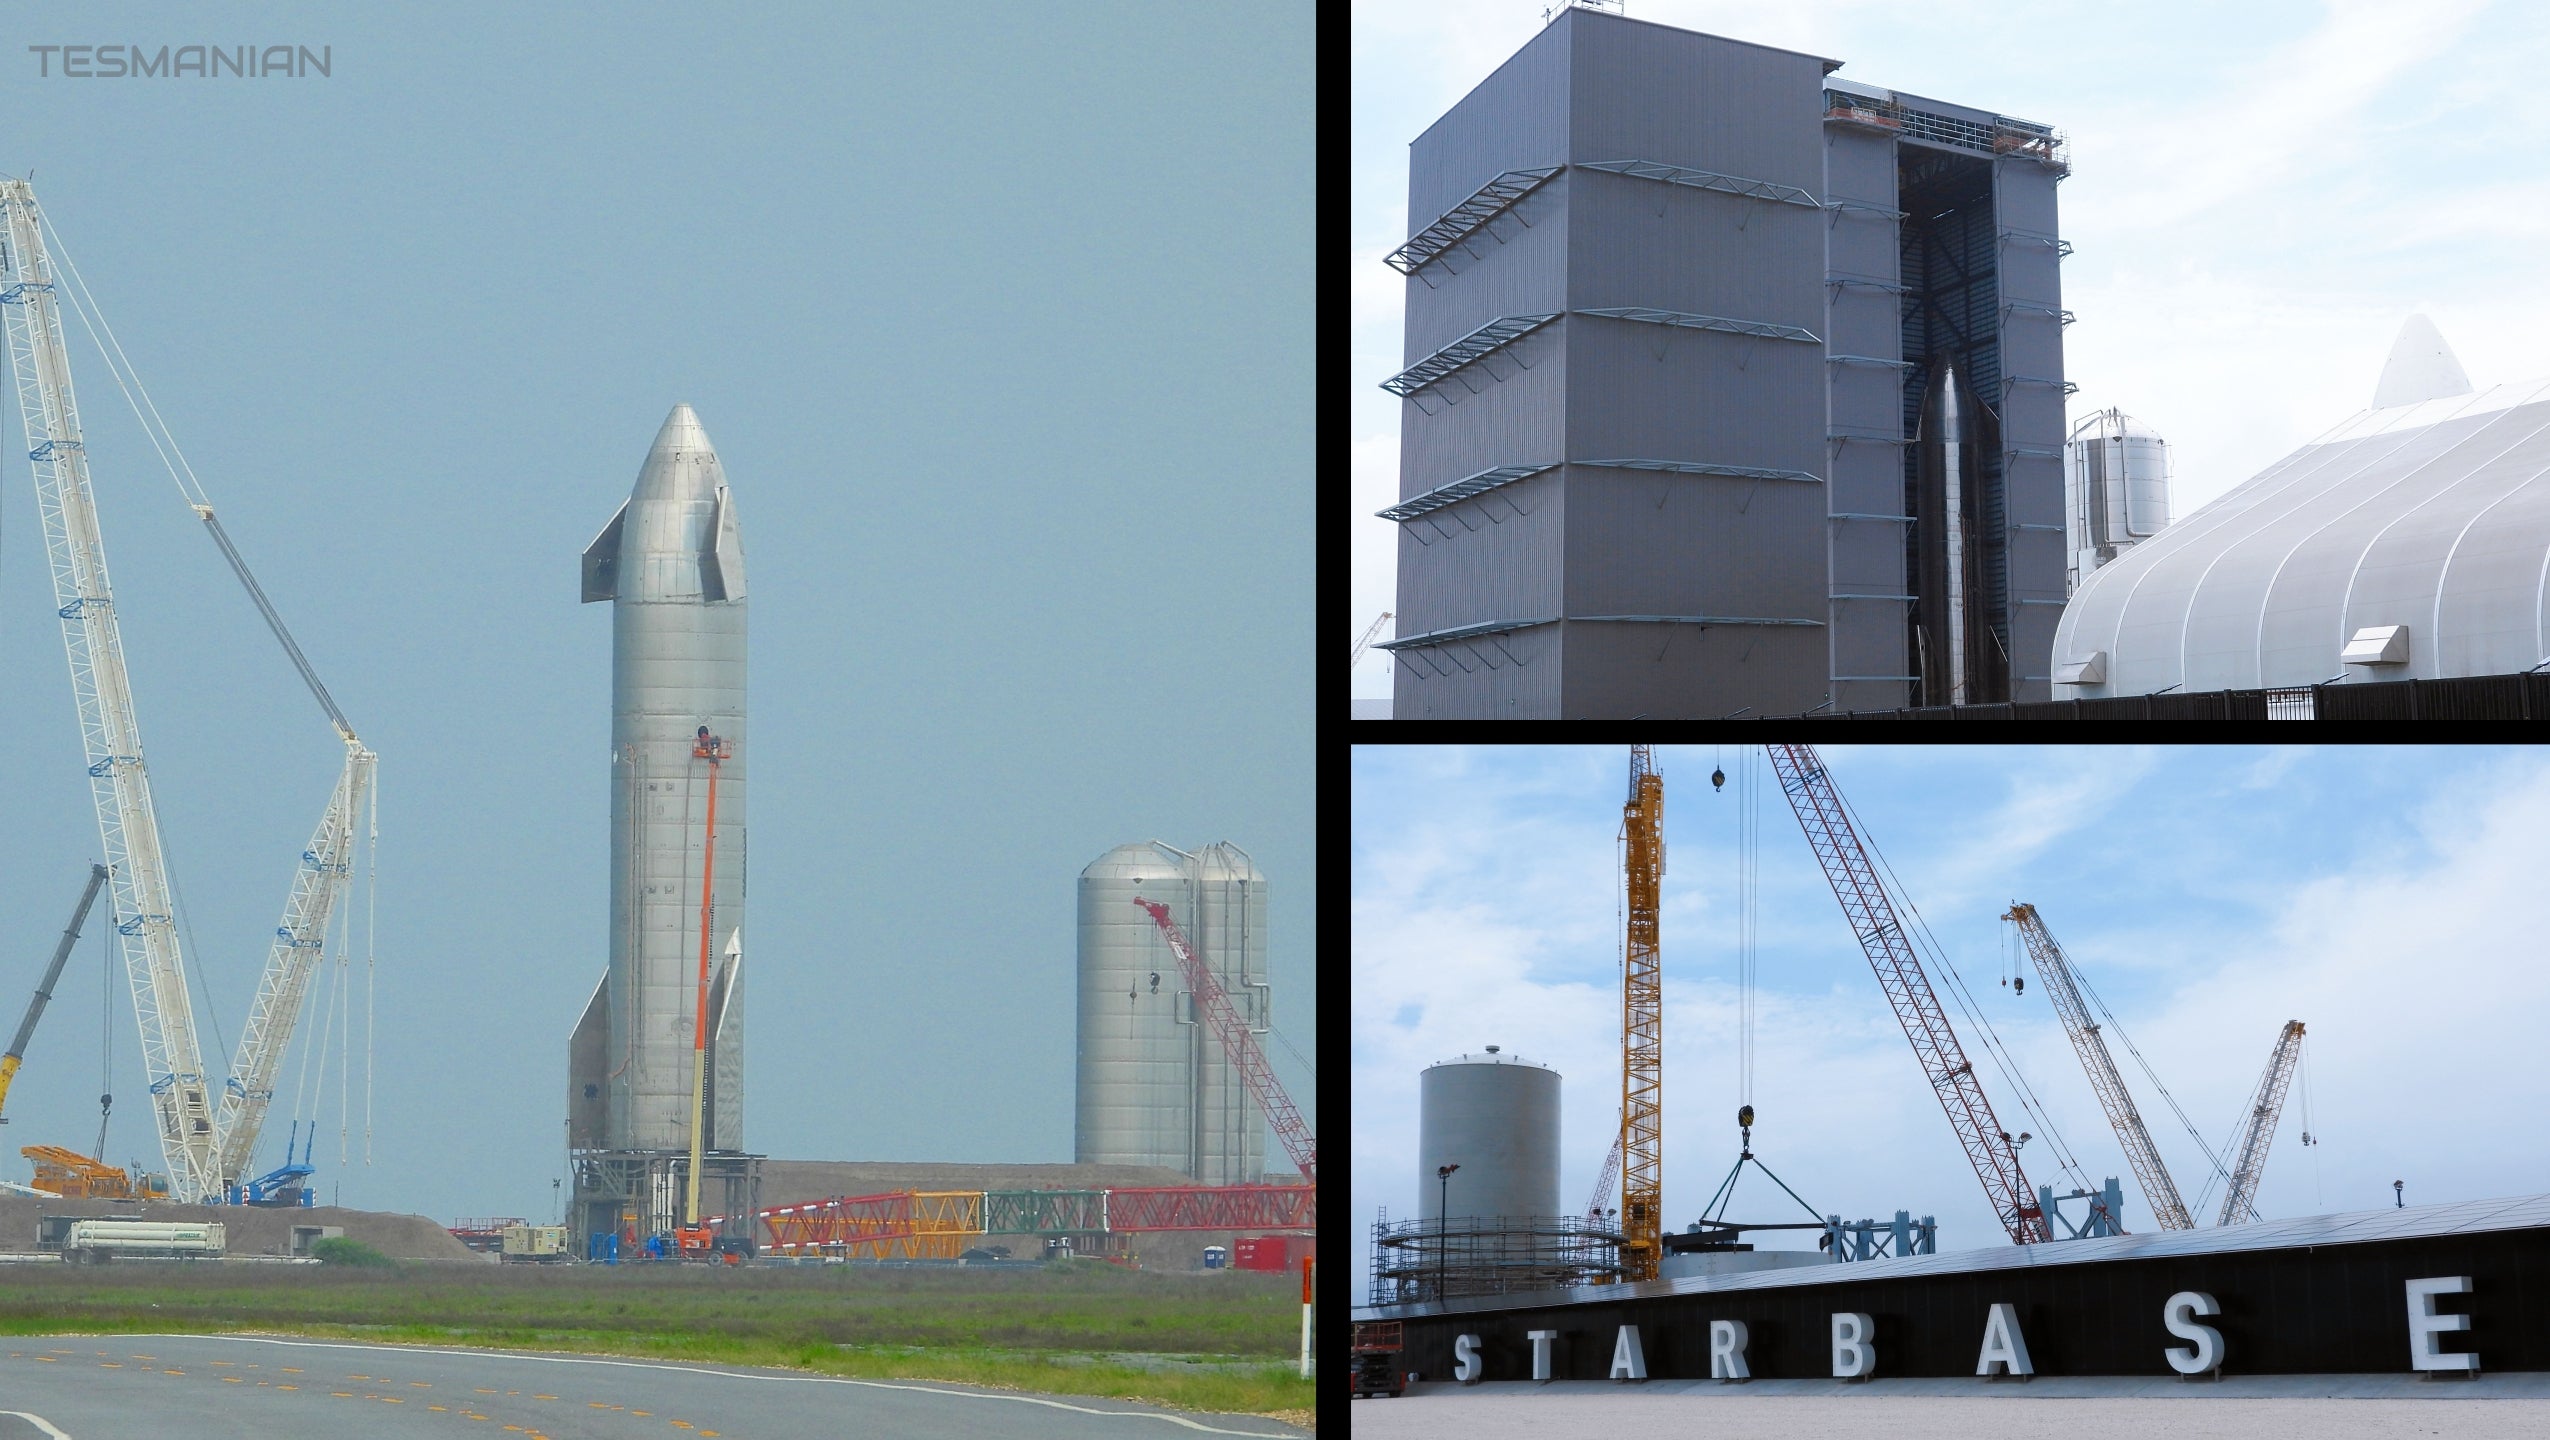 SpaceX Texas Launch Site Starts To Look Like A Welcoming Spaceport As 'Starbase' Sign Is Installed [photos]